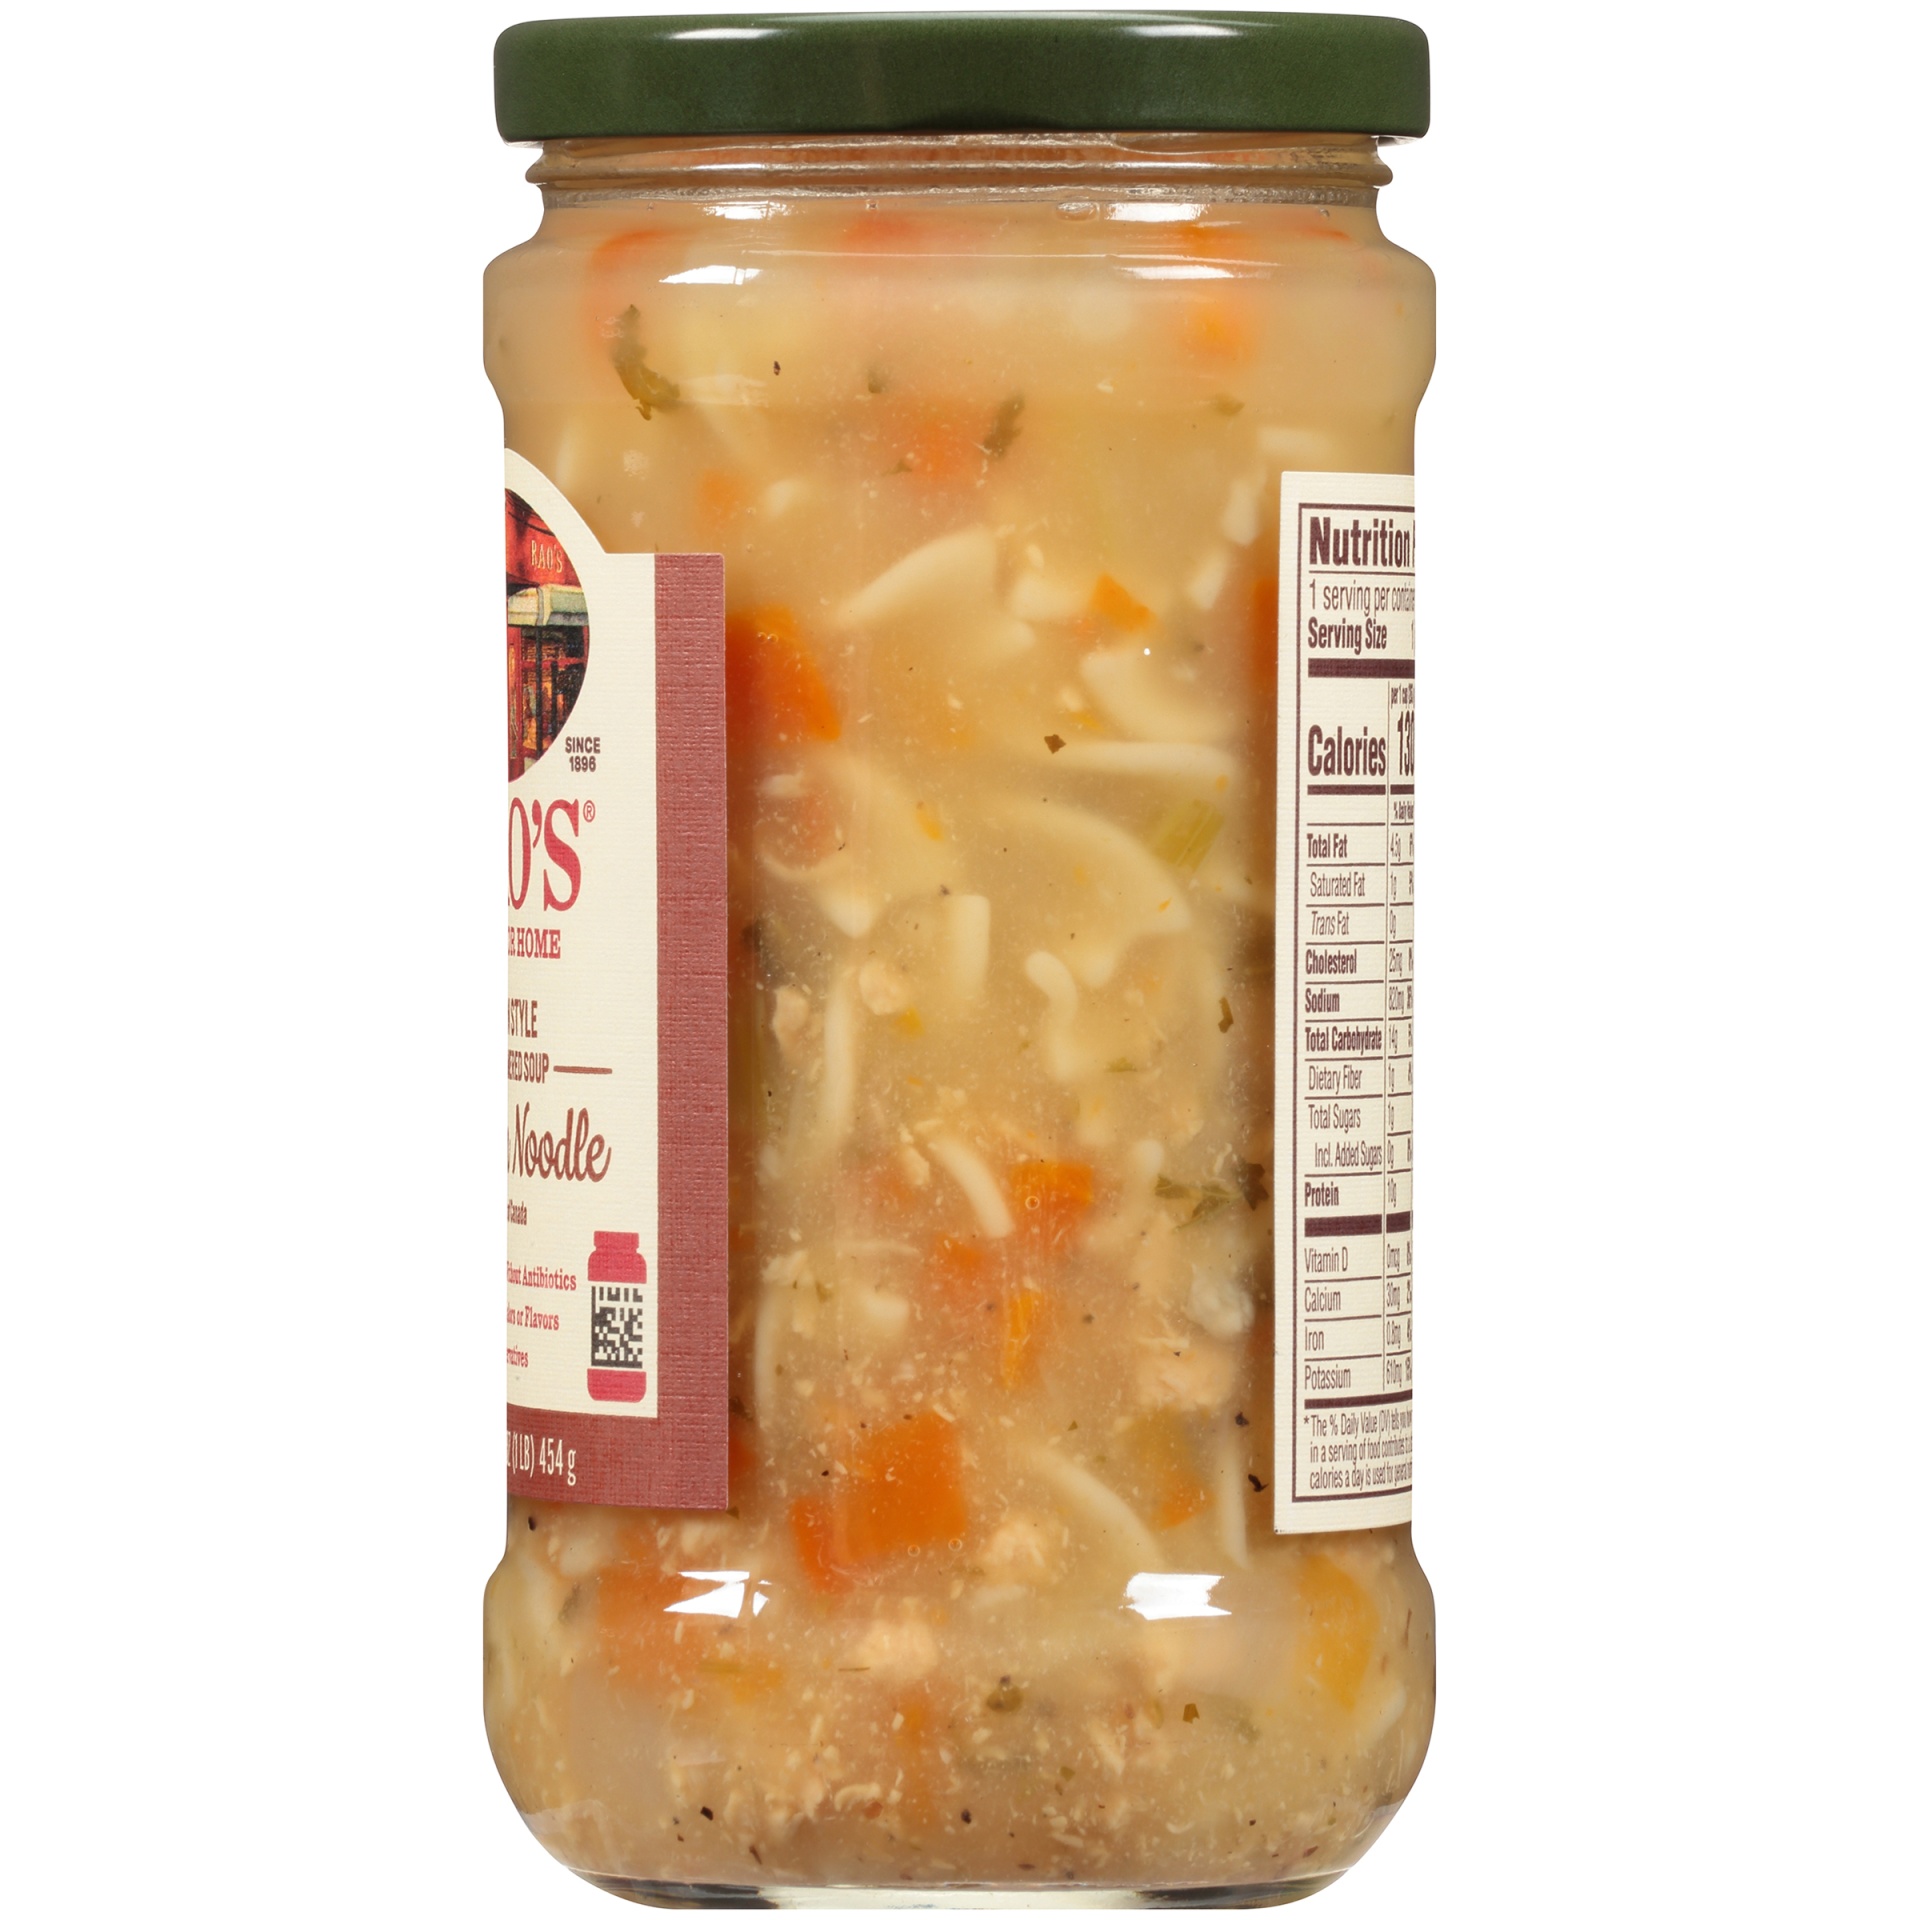 Rao's Homemade Chicken Noodle Italian Style Slow Simmered Soup 16 oz